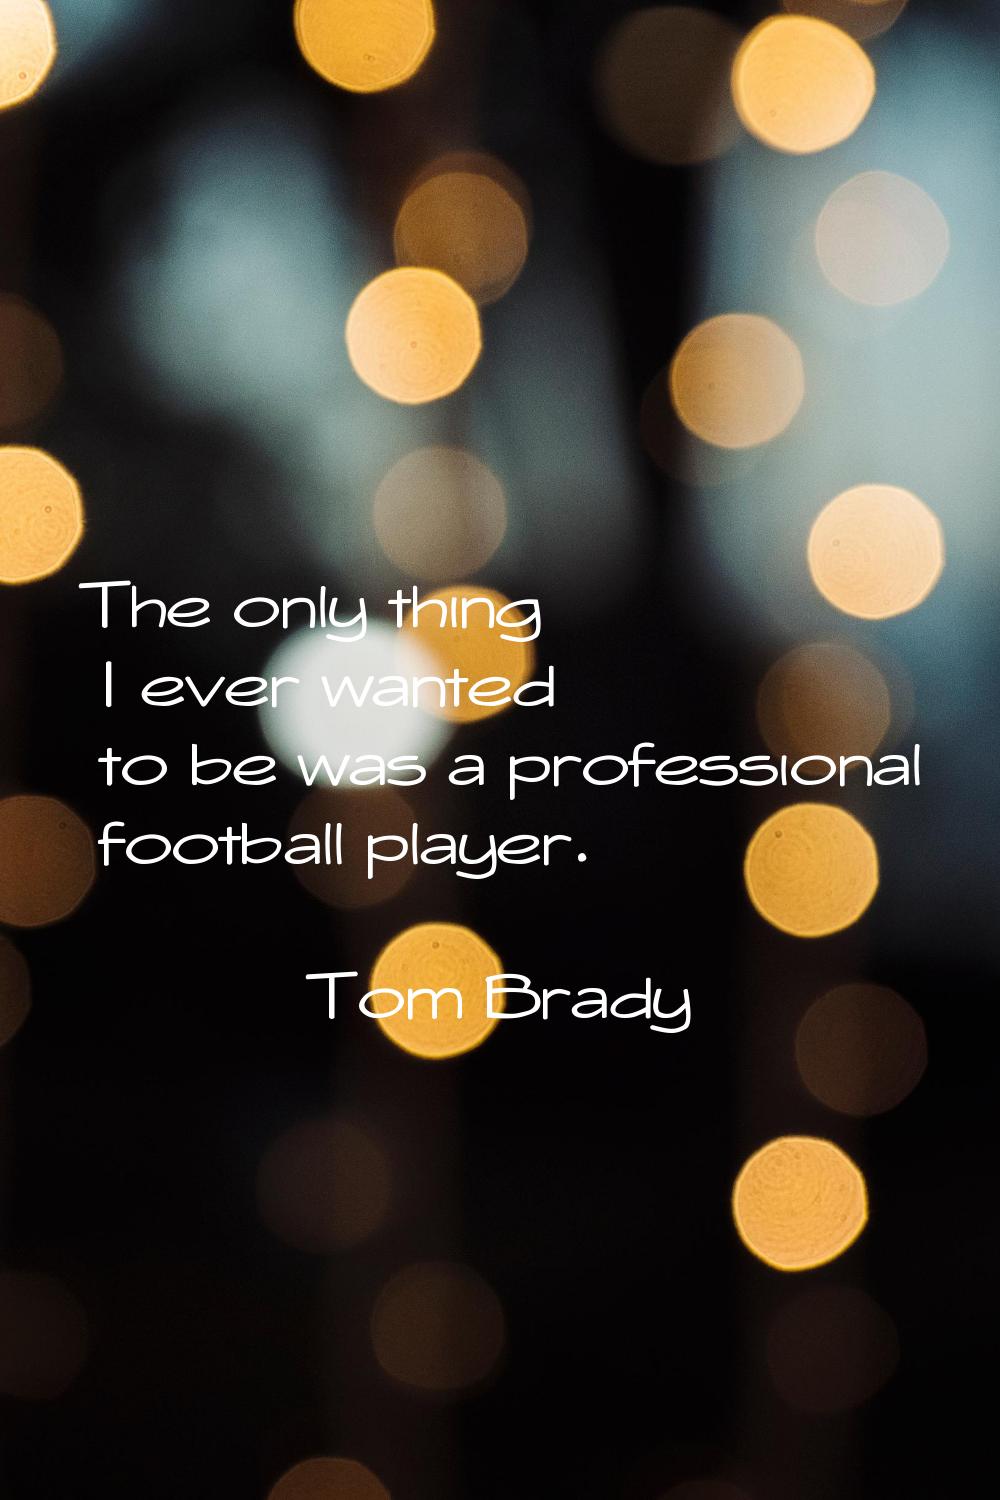 The only thing I ever wanted to be was a professional football player.